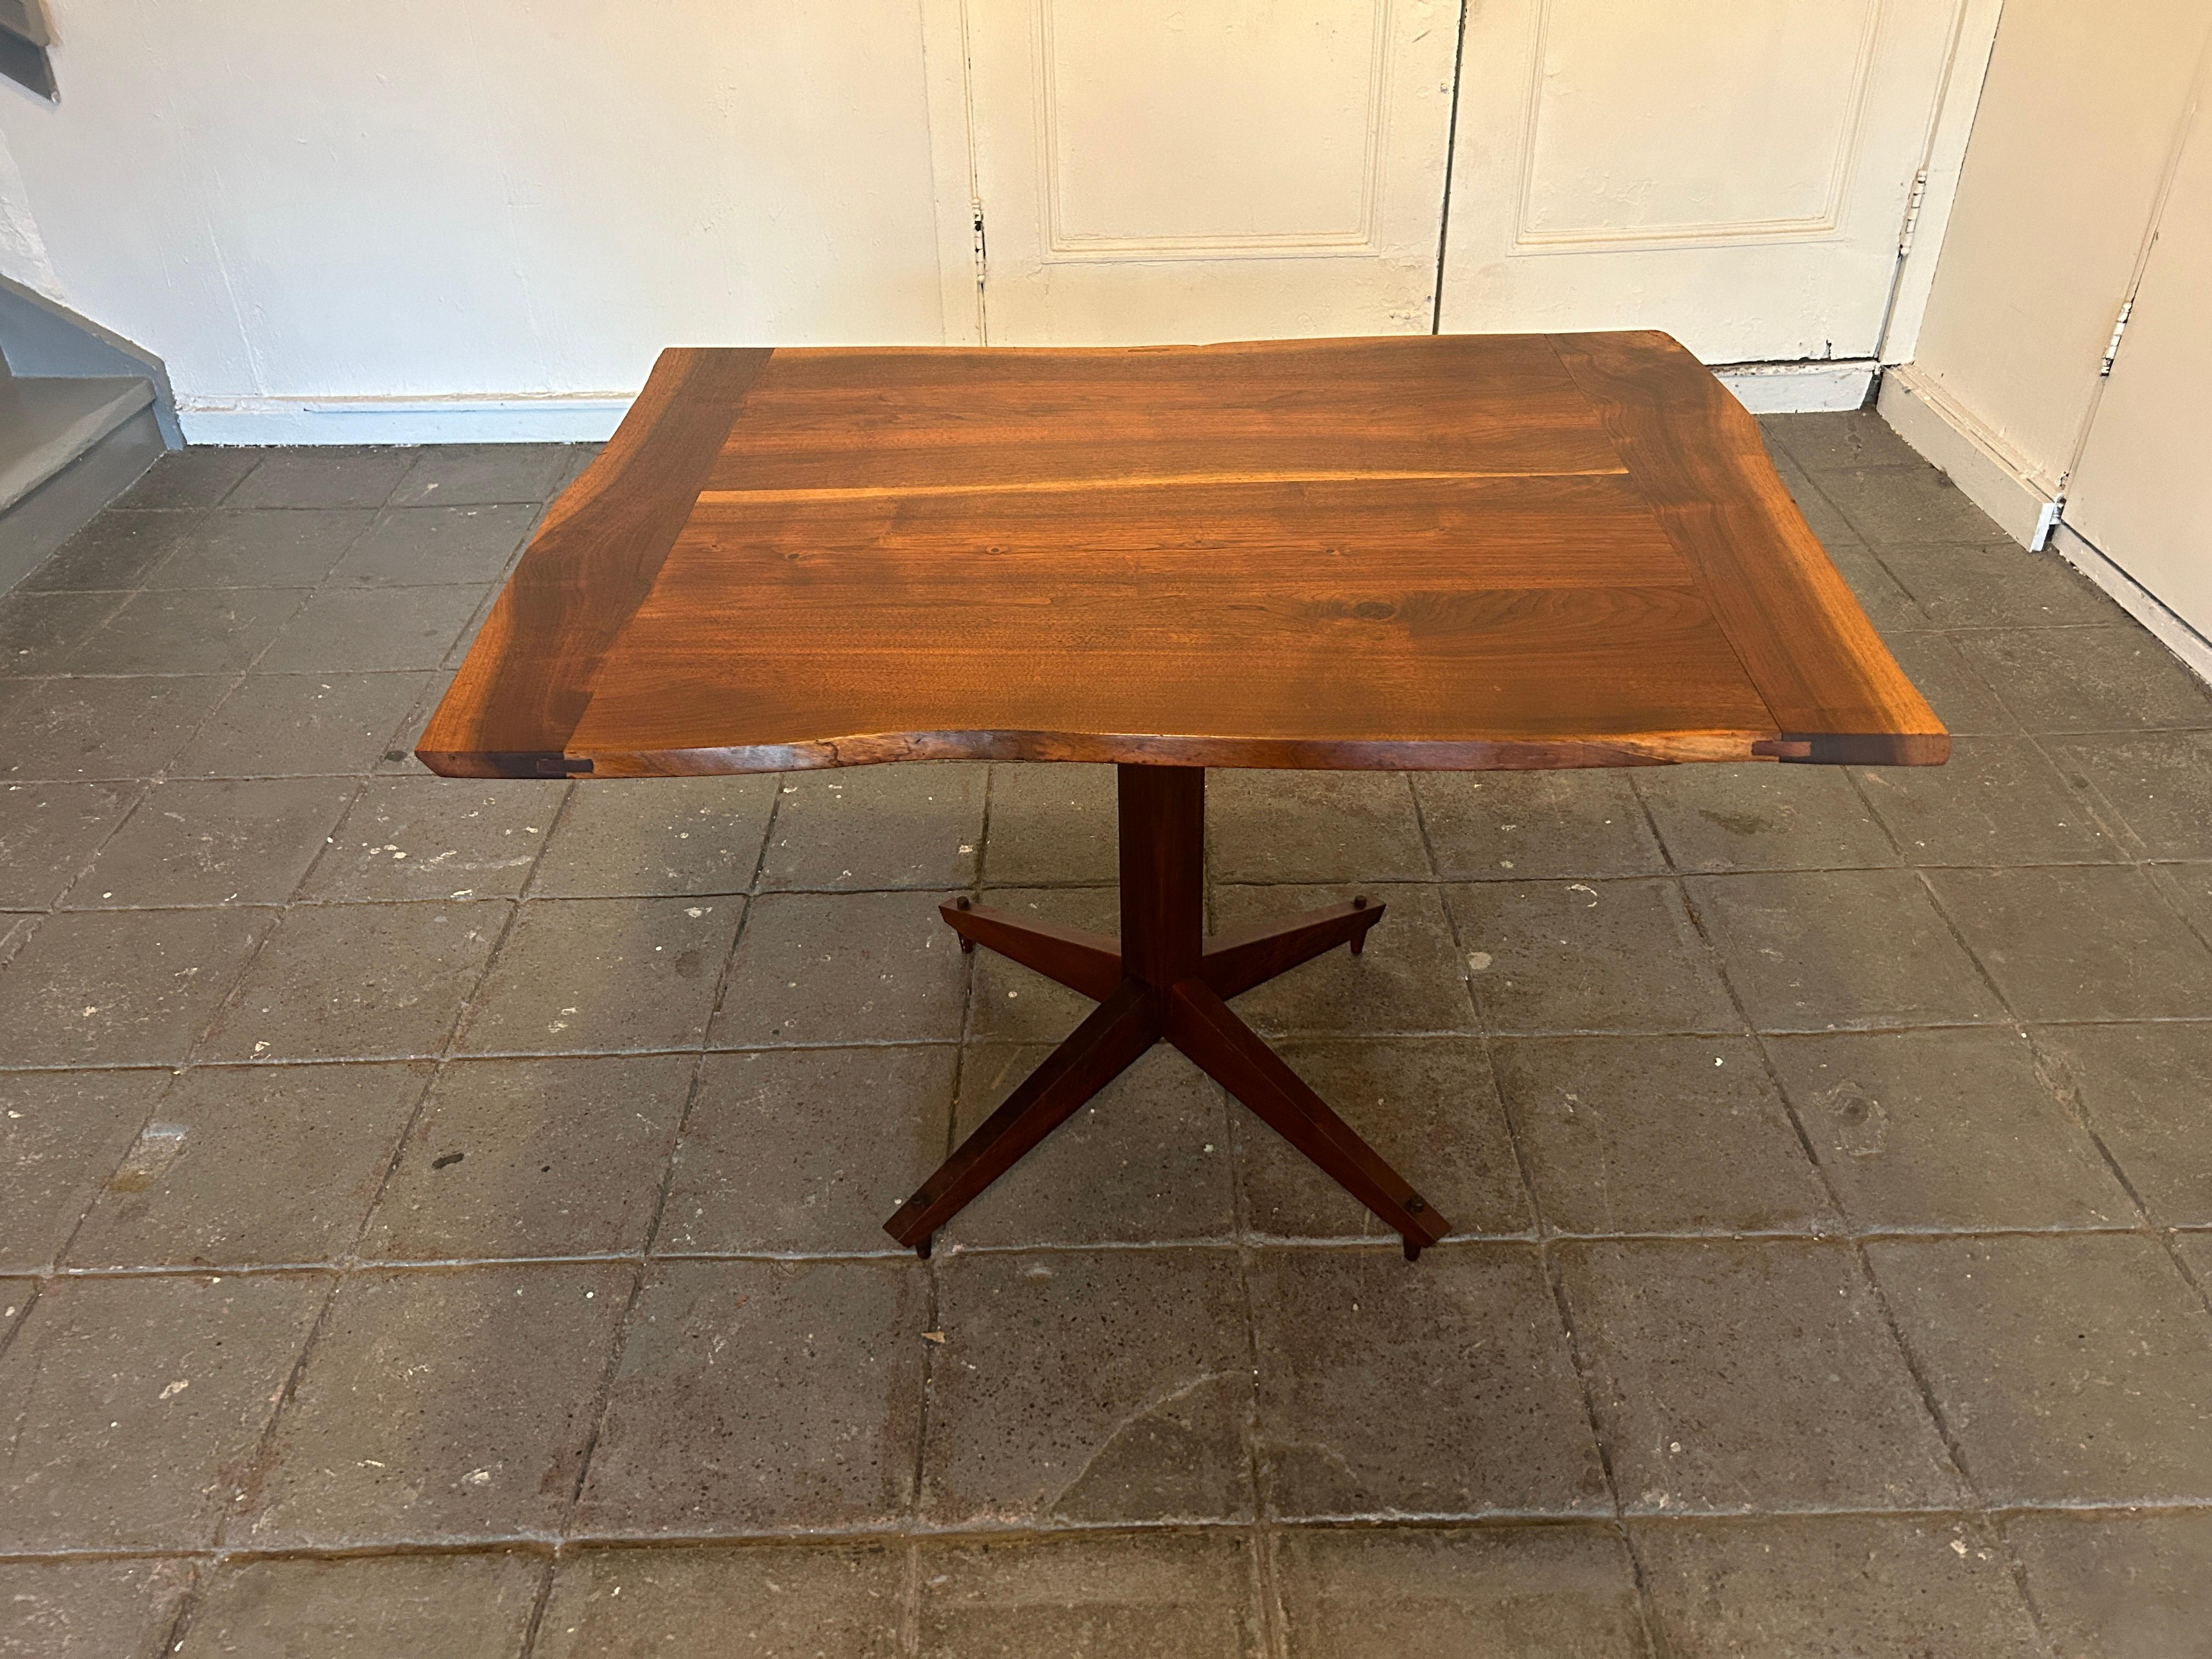 Rare Mid Century Studio Craft Sculptural live edge Walnut Dining Table or Desk by James Martin. Handmade in the USA - New Hope, PA. All Solid American black walnut wood. James Martin worked with George Nakashima / Studio prior to doing his own